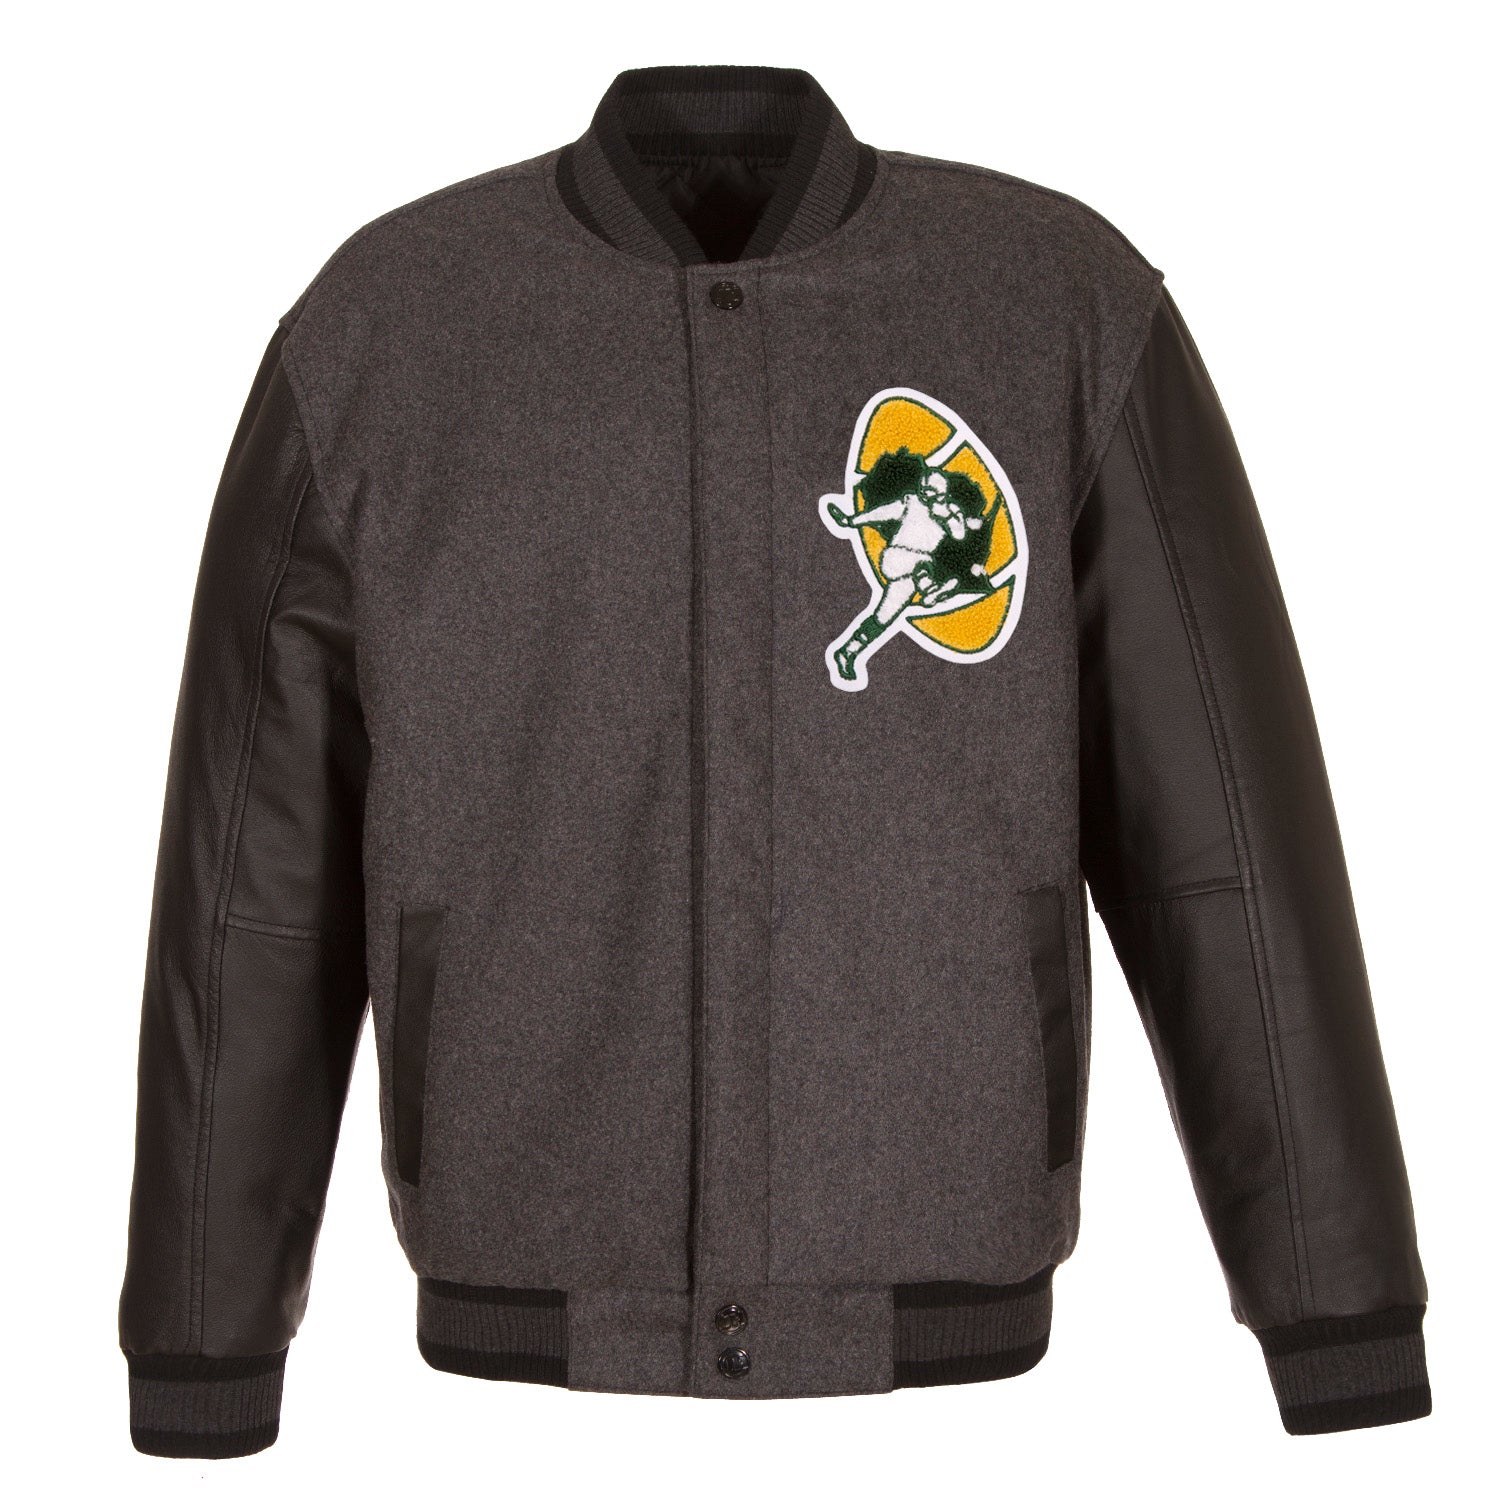 Green Bay Packers Wool & Leather Throwback Reversible Jacket - Charcoal Medium